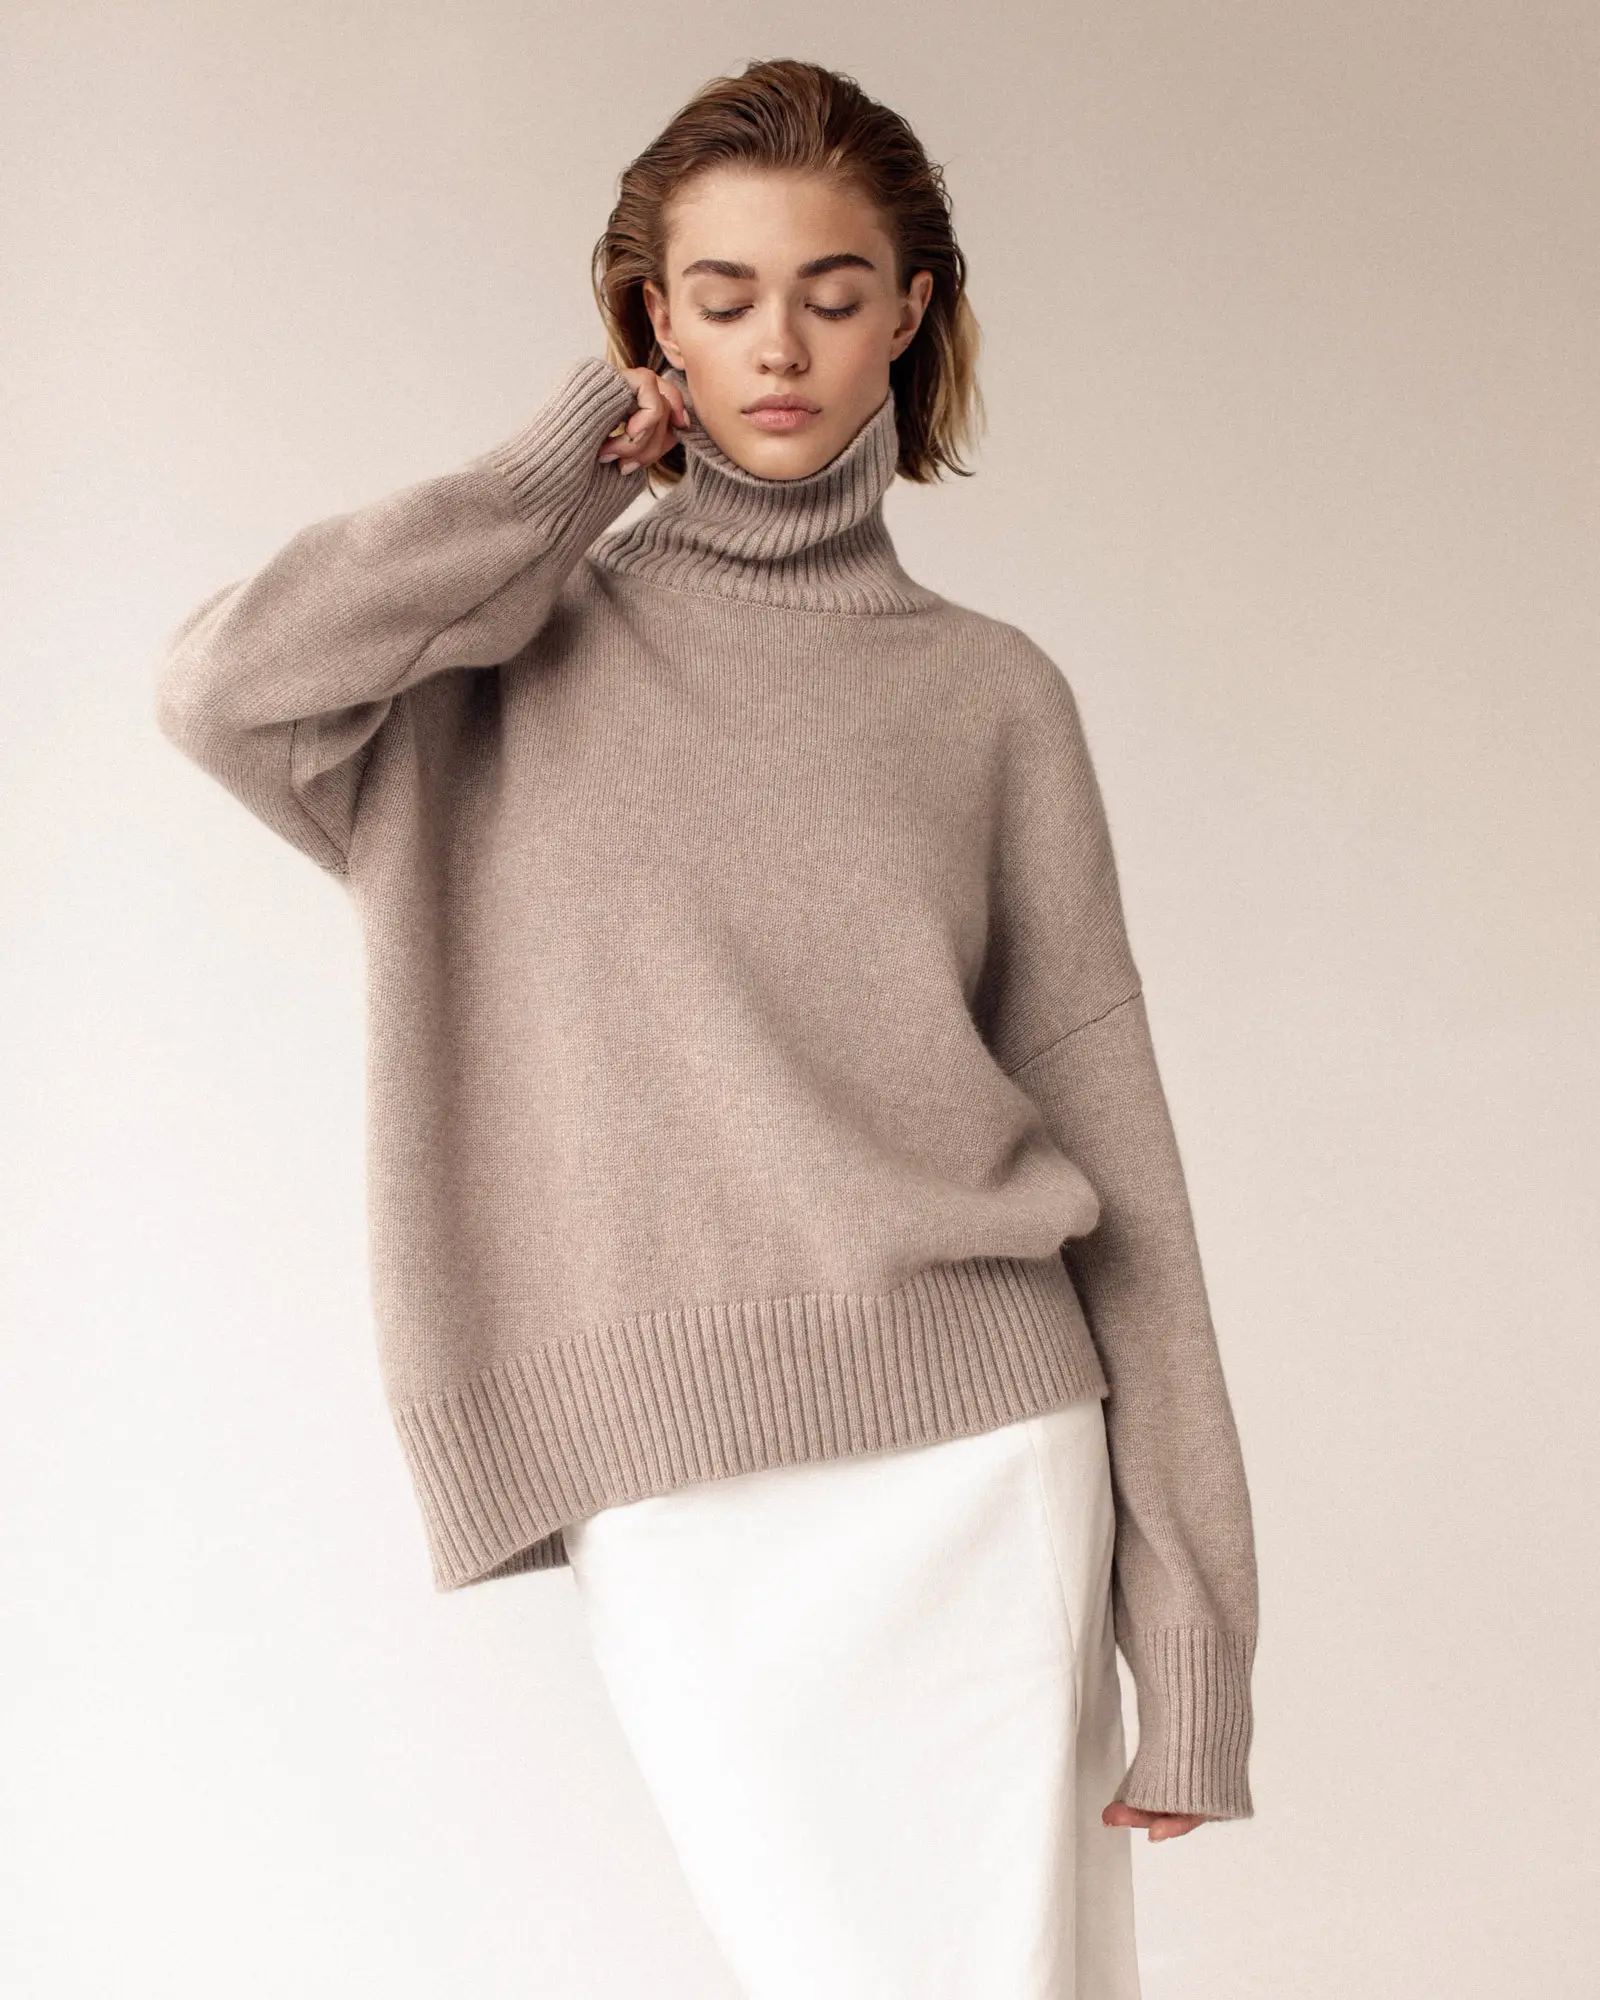 Winter Custom Women Solid Color Turtle Neck Loose Knitted Oversize Sweater Turtleneck Long Sleeve Lady Pullover Basic Sweater